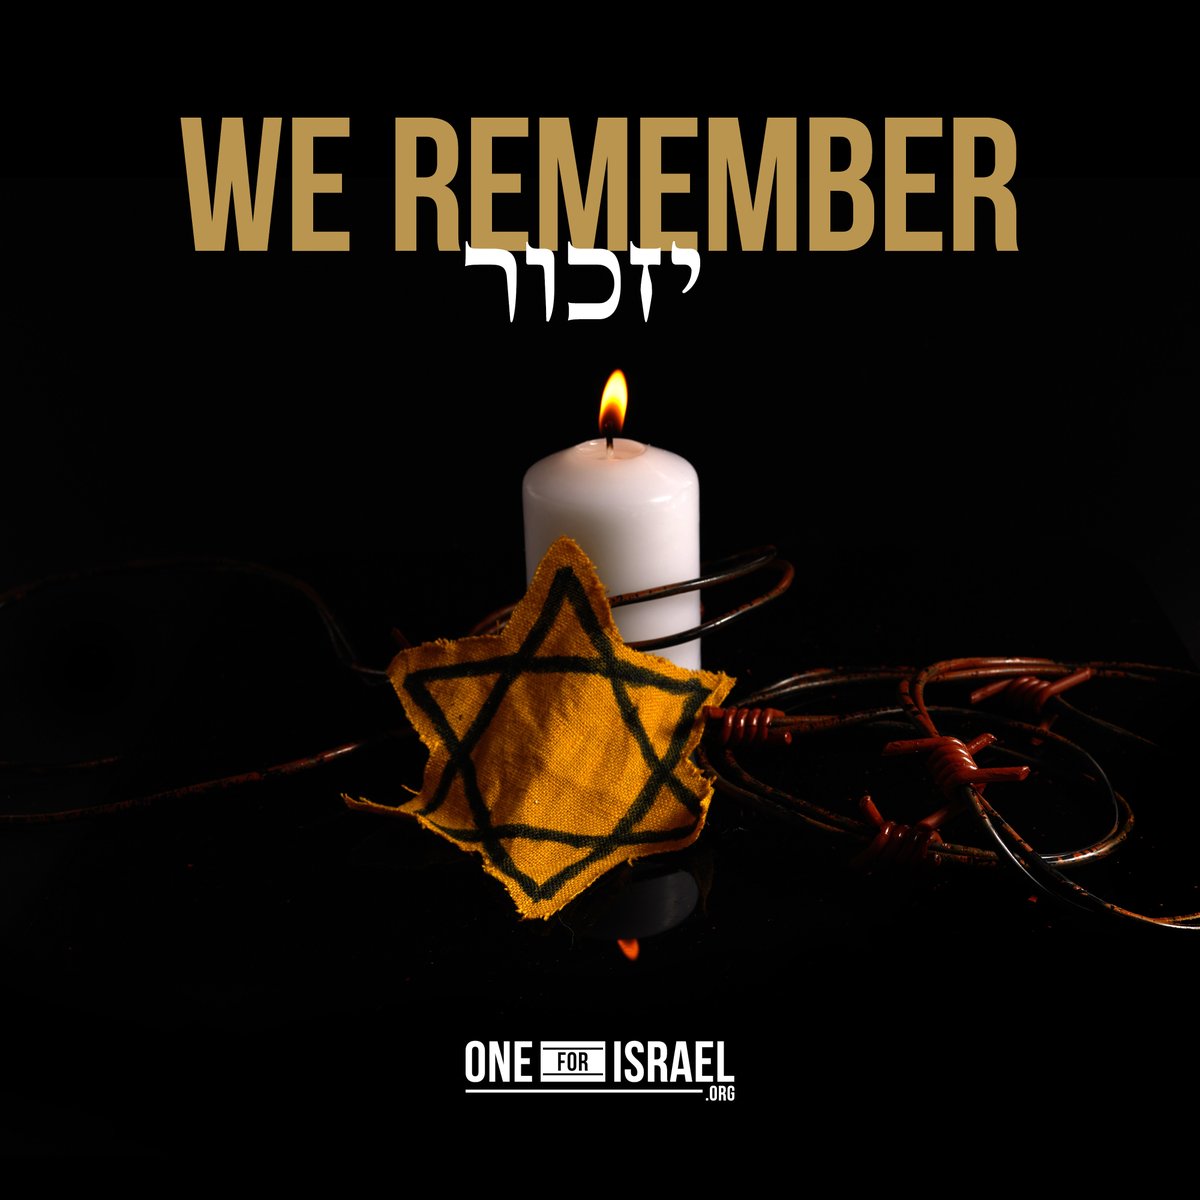 Holocaust Remembrance Day. In memory of 6 million Jews. We remember and will never forget.